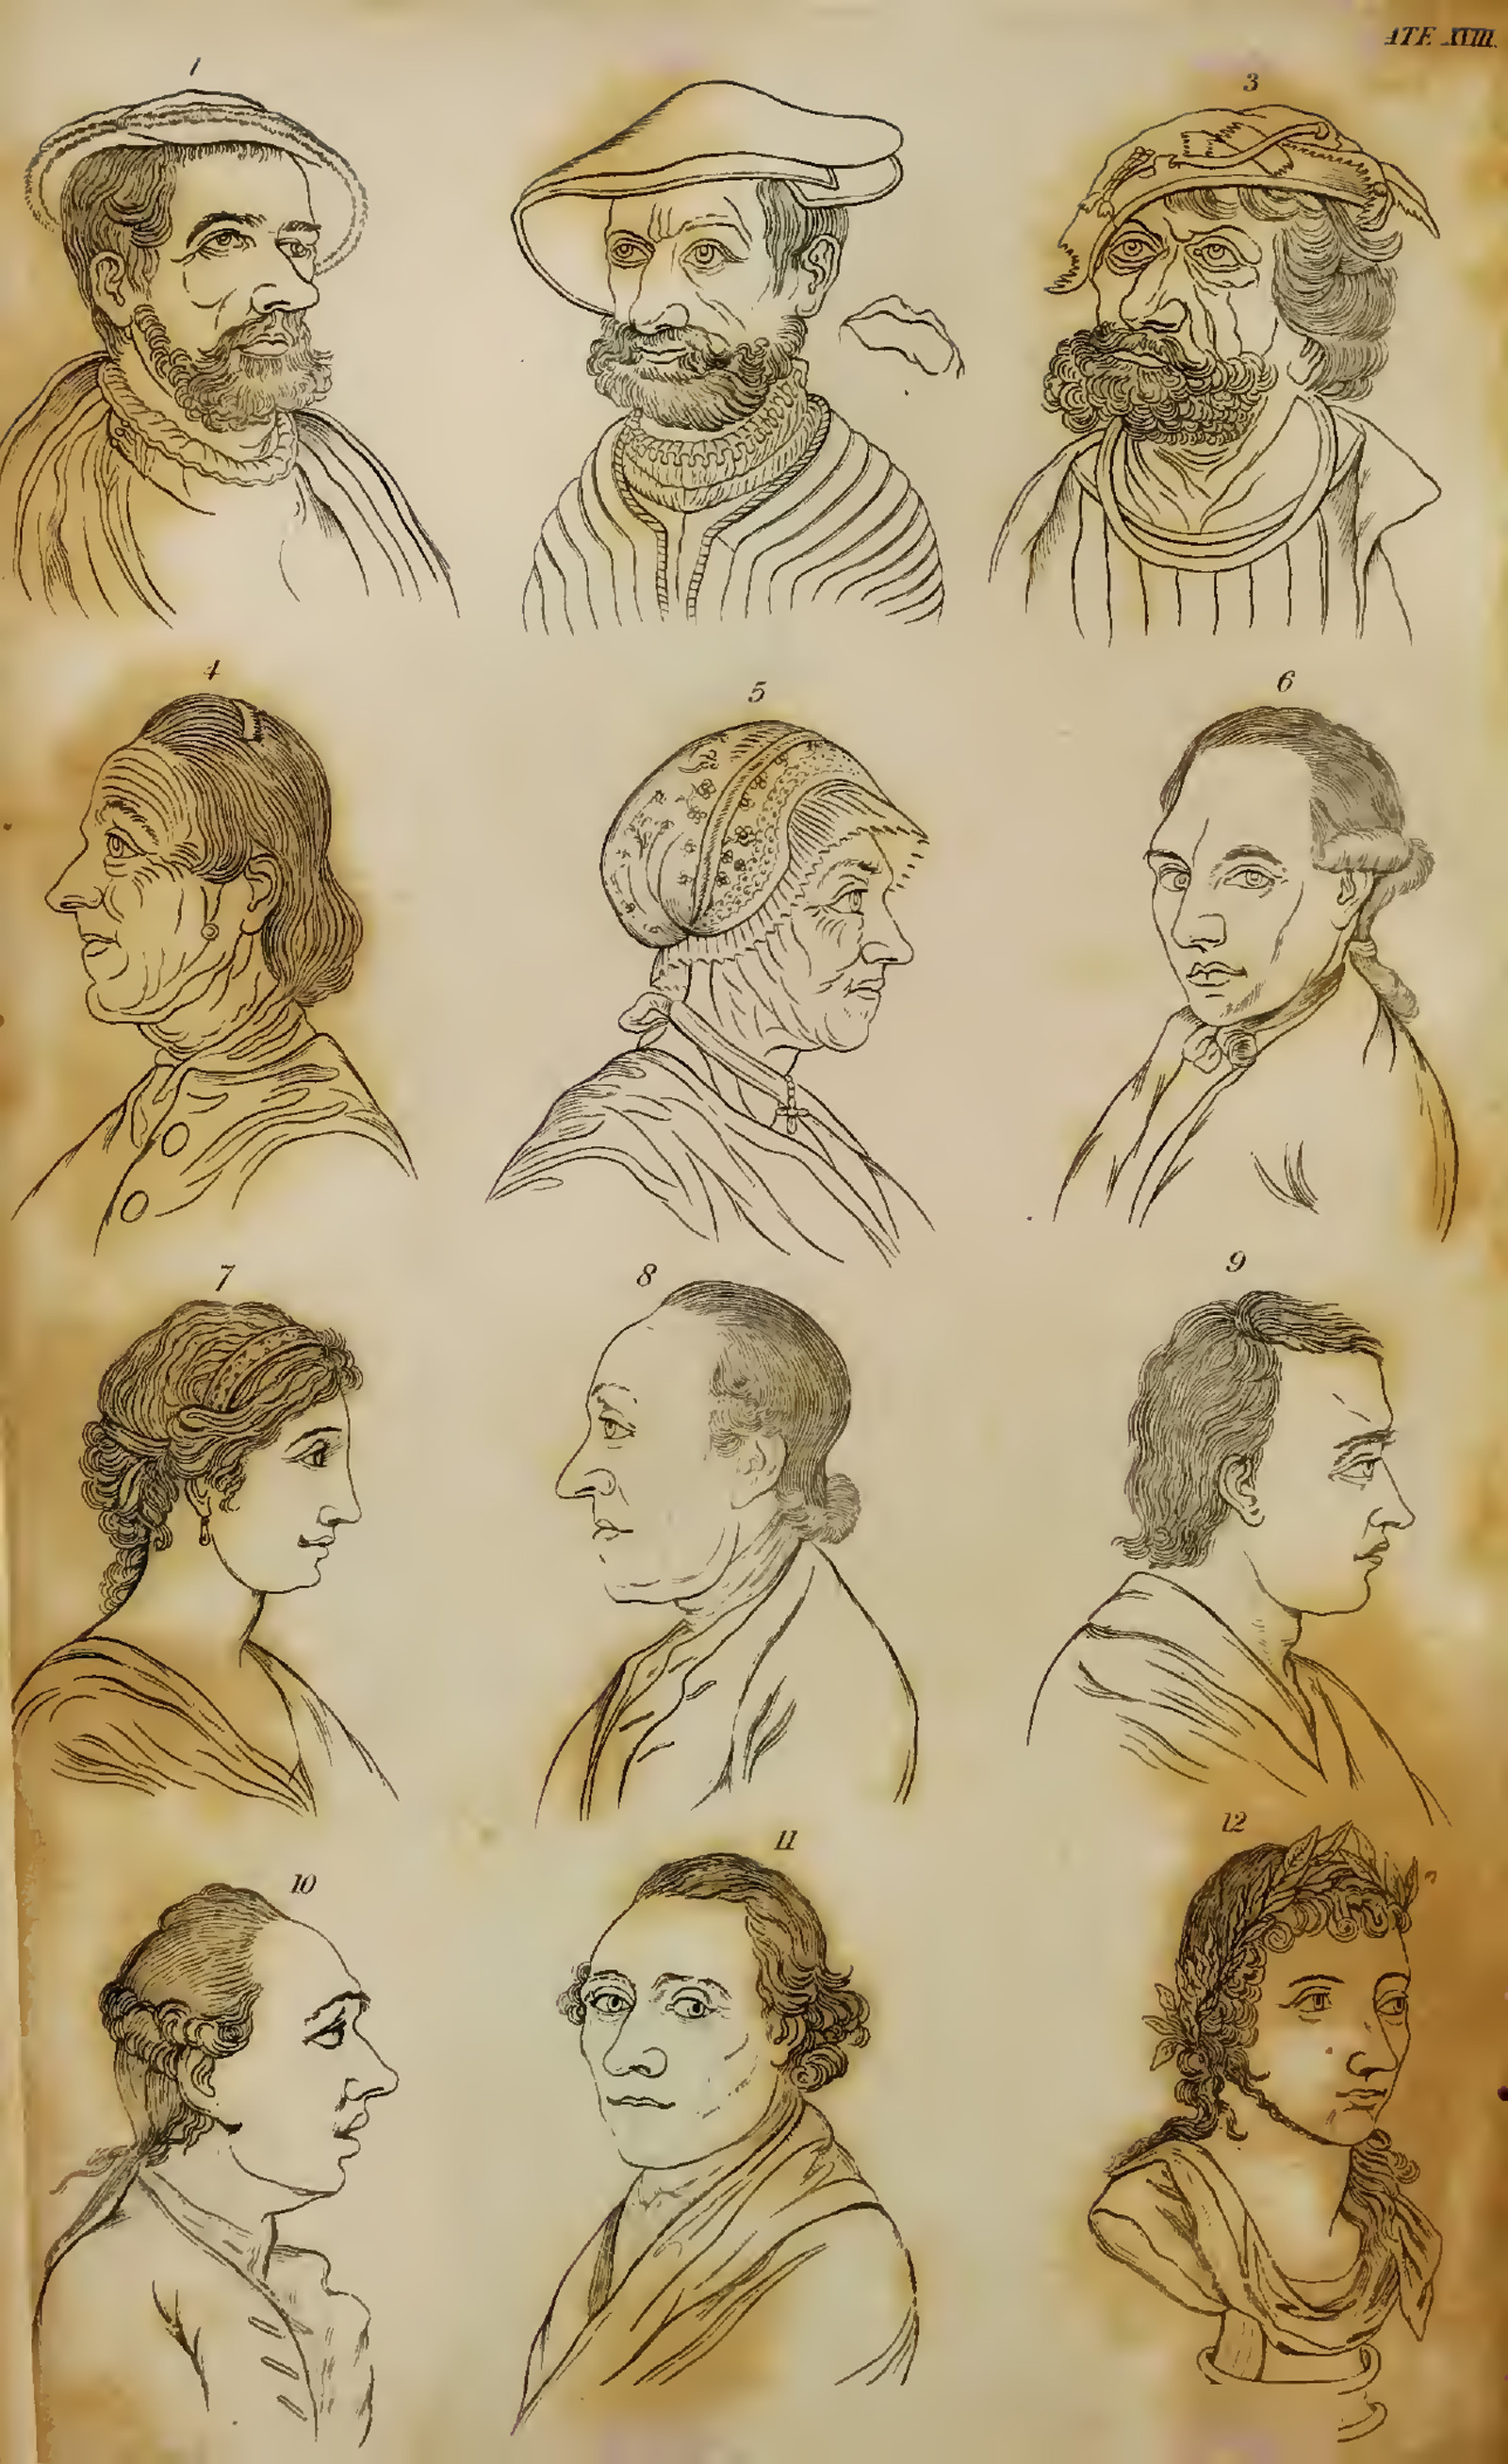 Illustration of the profile of 12 men of various nationalities